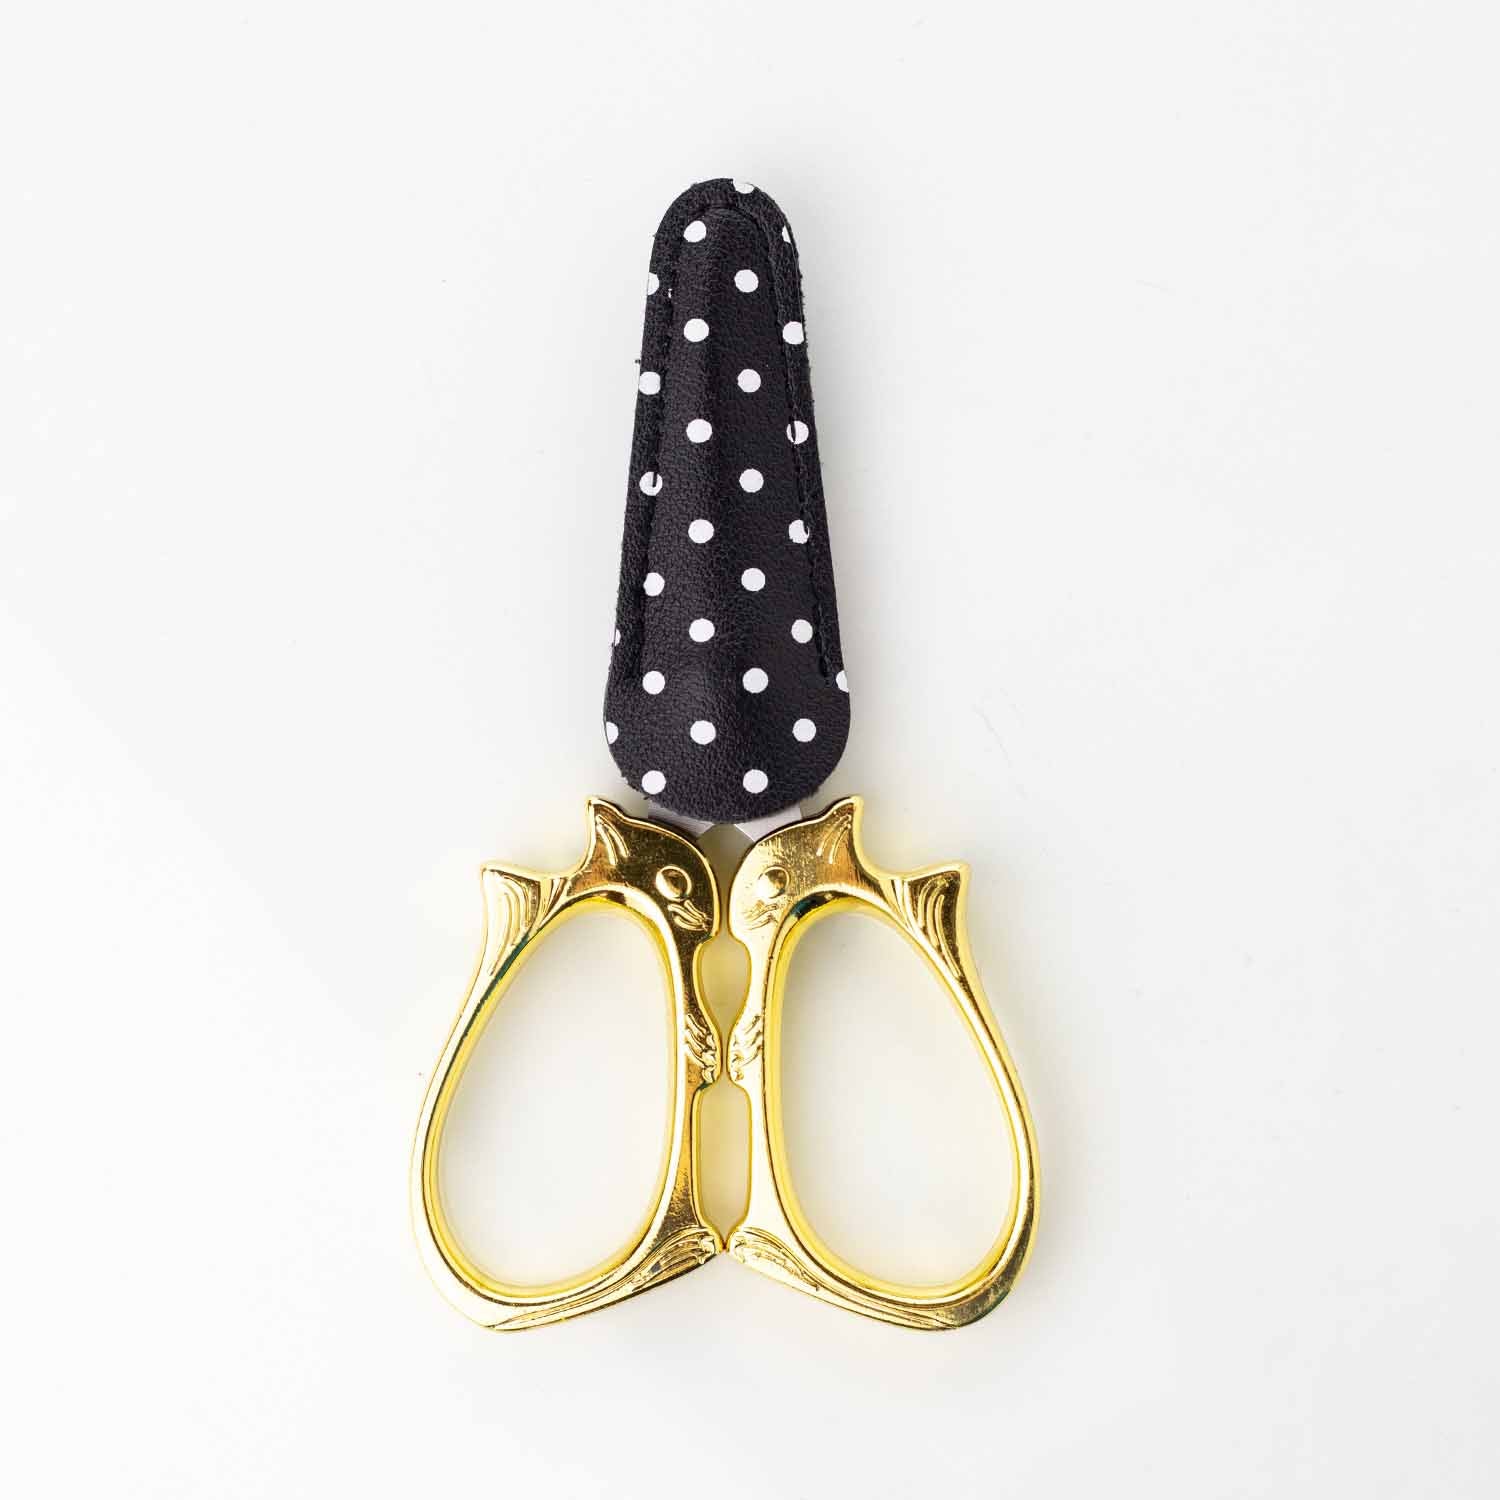 Lykke Scissors - 24K Gold Plated Embroidery Scissors at Jimmy Beans Wool